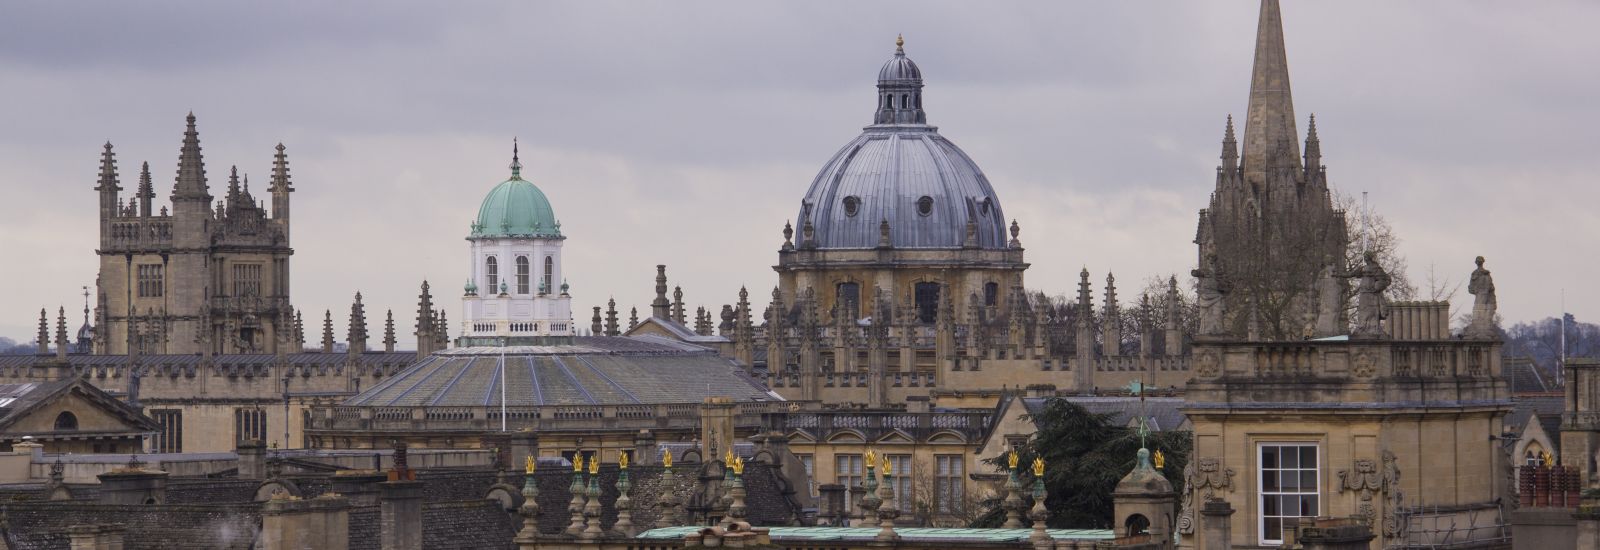 The Oxford skyline on a cloudy day